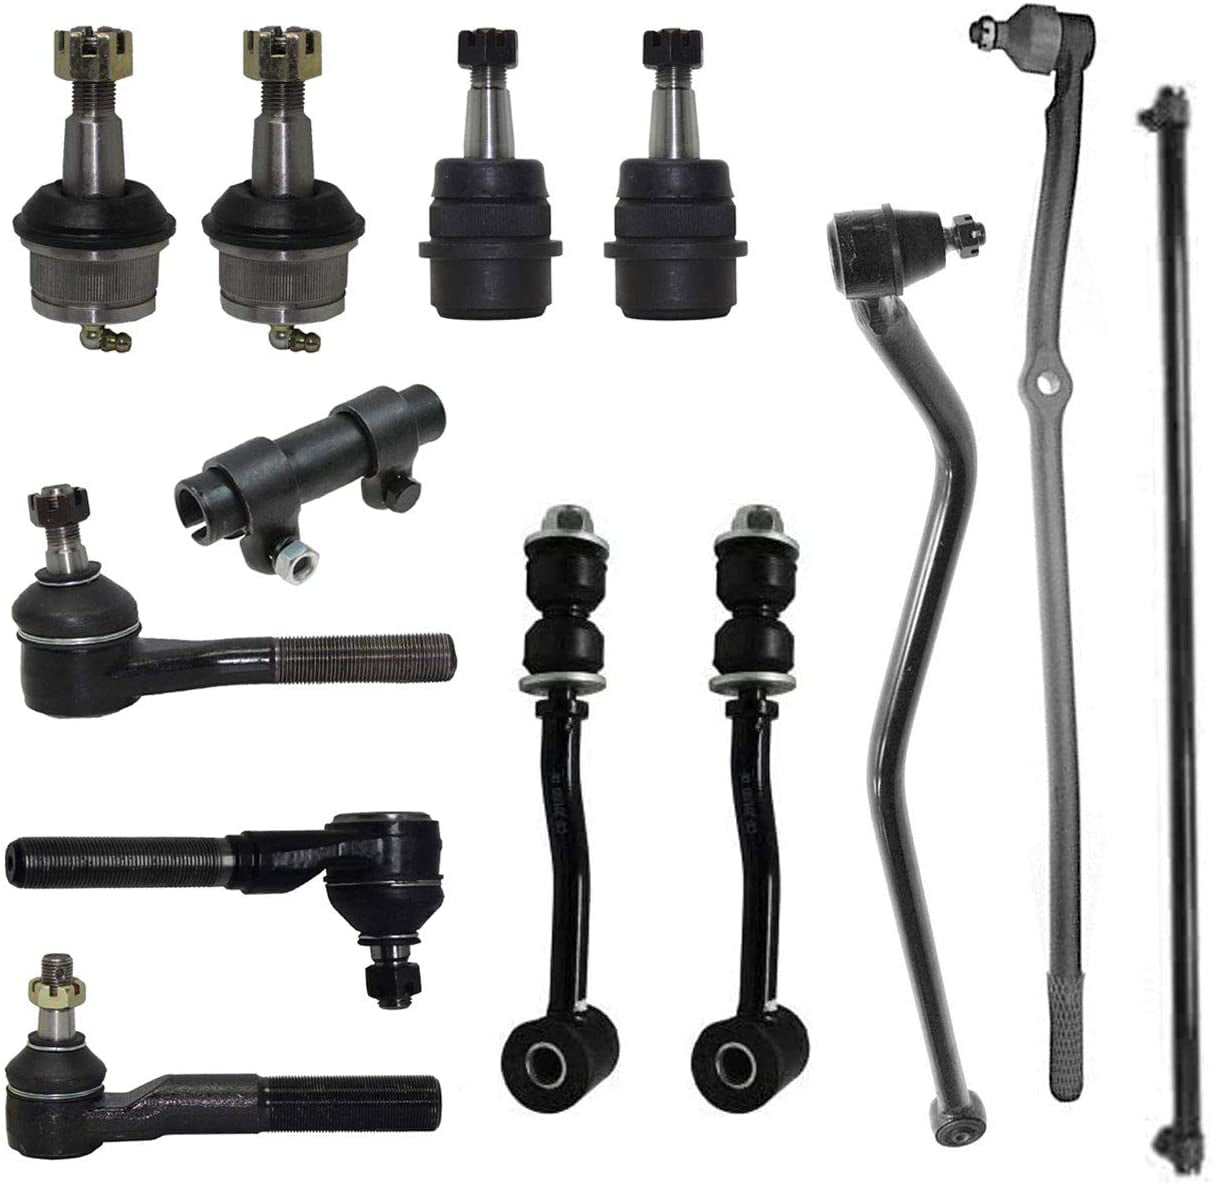 Detroit Axle Outer Tie Rods and Sway Bar Kit for 1991-2001 Jeep Cherokee - Adjustment Sleeves 1991-1992 Jeep Comanche 13pc Front Upper & Lower Ball Joints Track Bar 